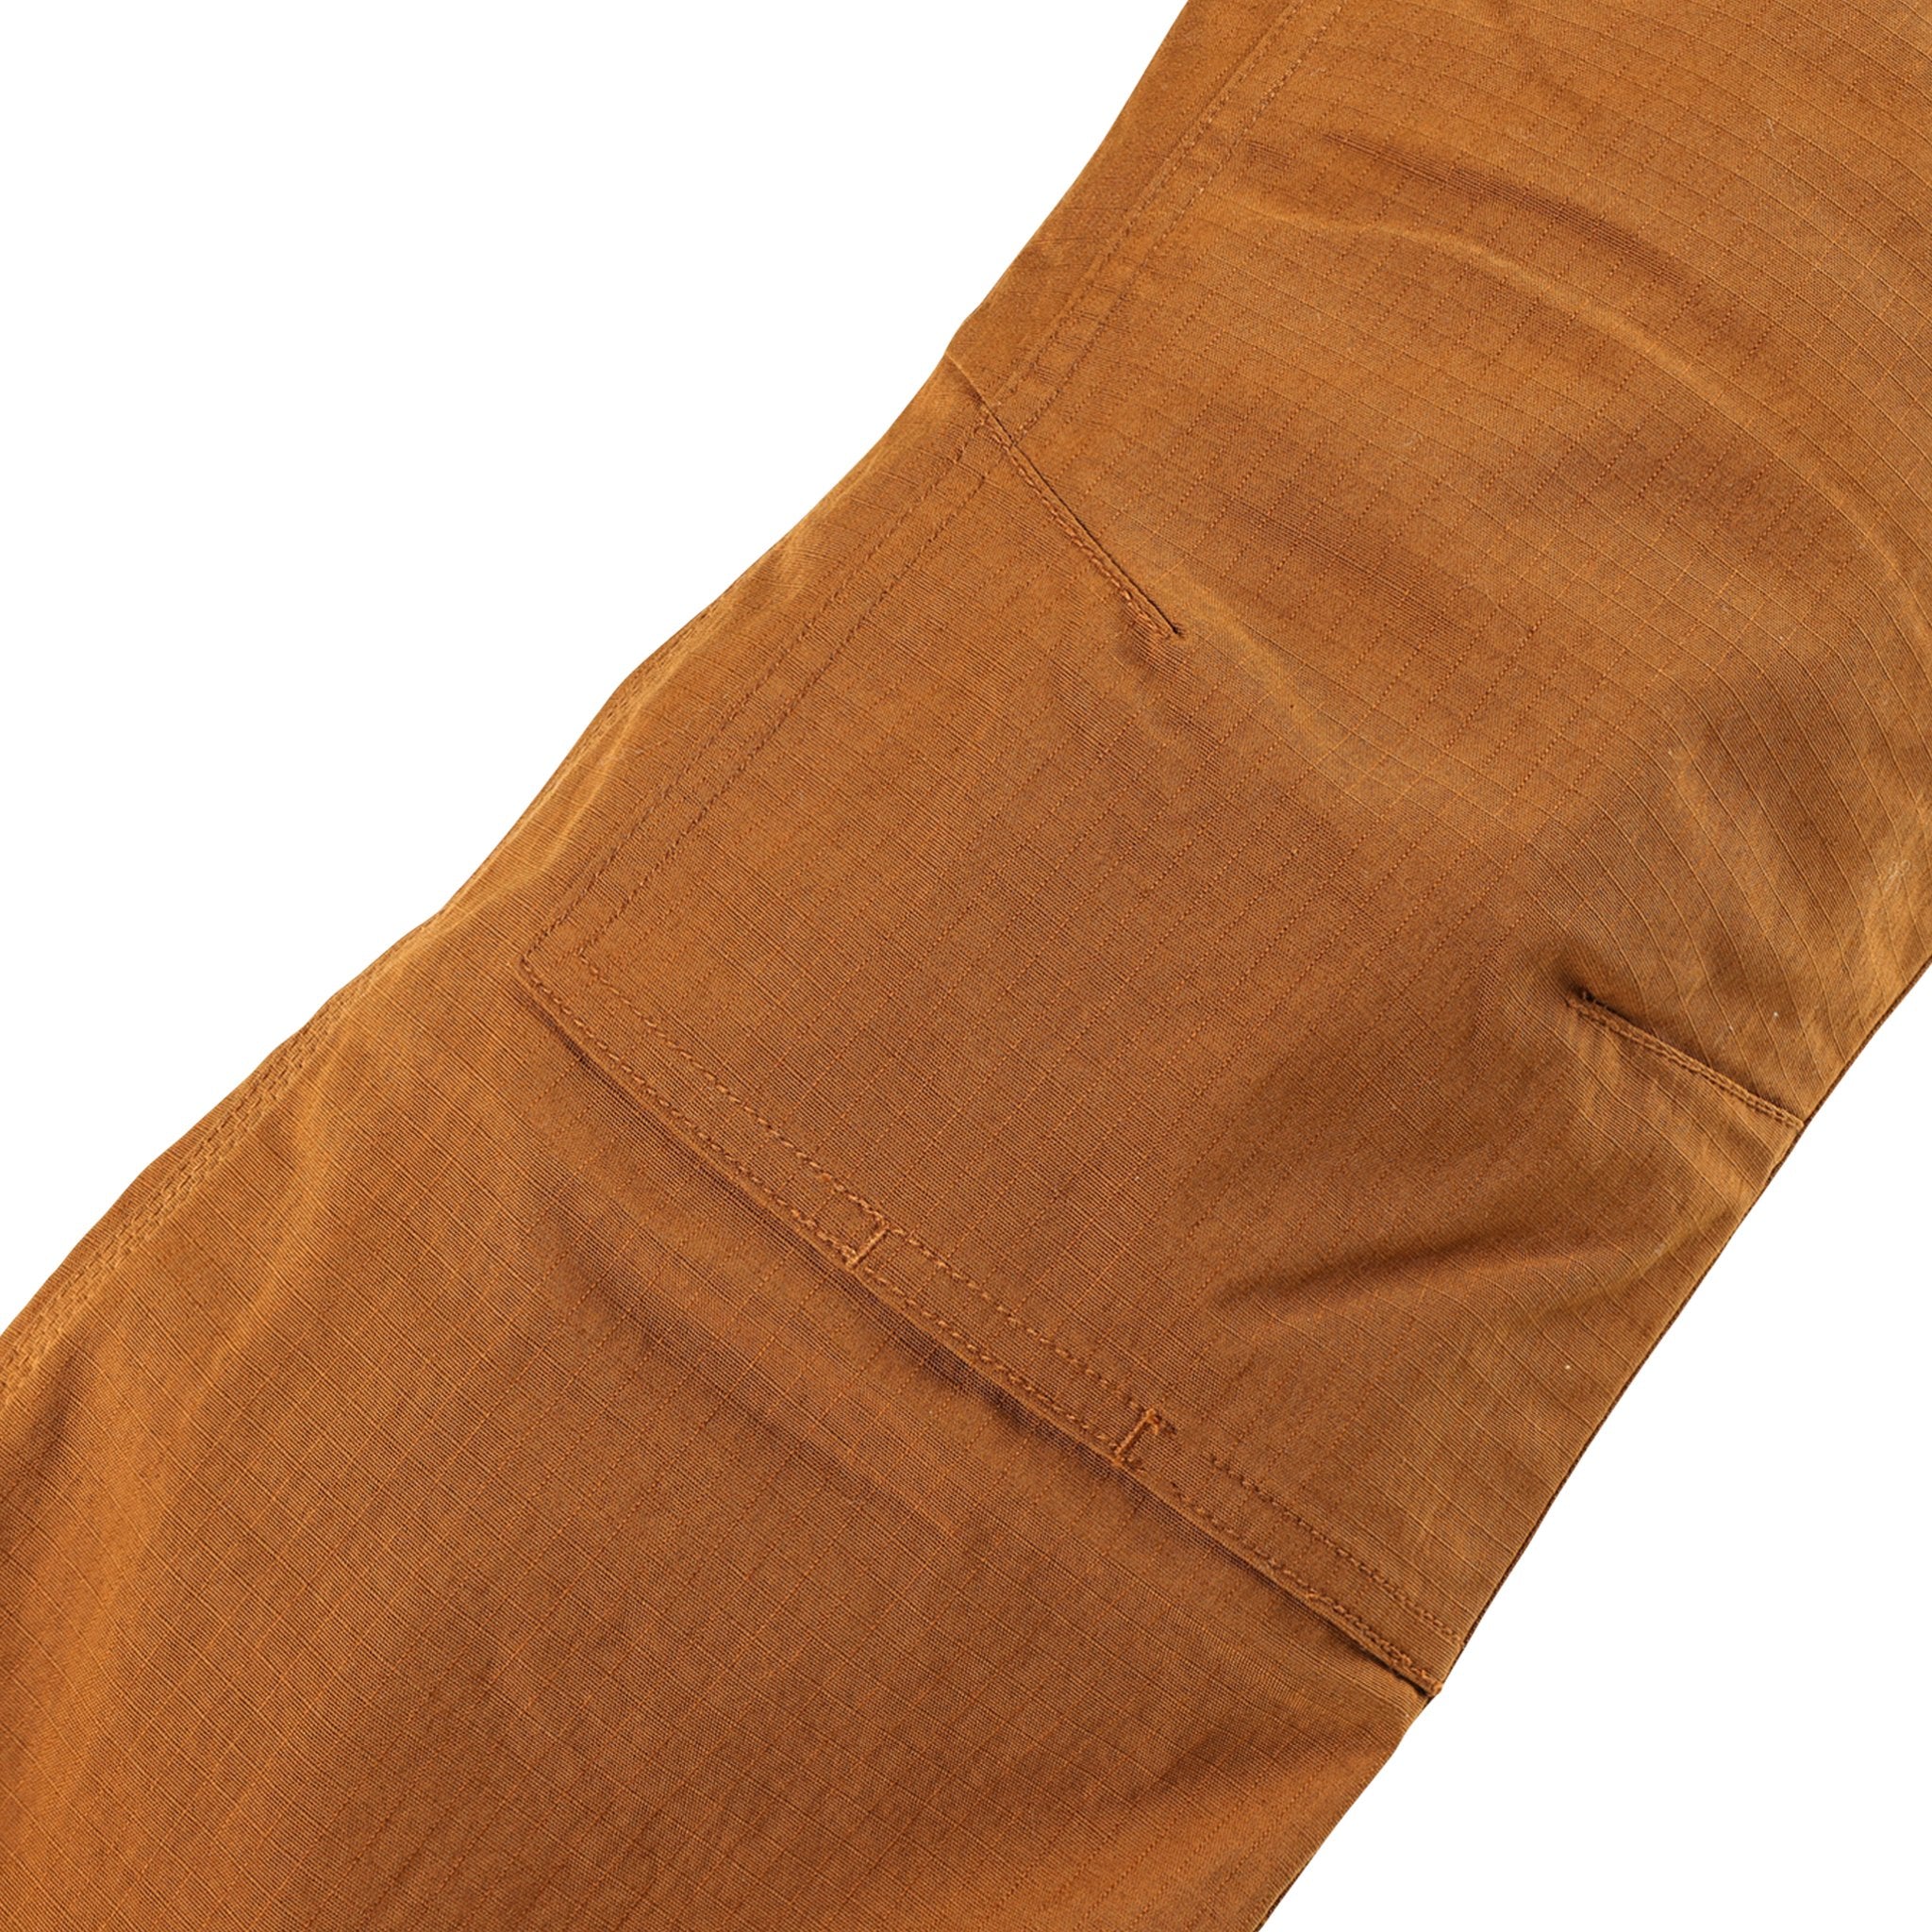 General shot of reinforced knees on Topo Designs Men's Mountain lightweight hiking Pants Ripstop in Earth brown.